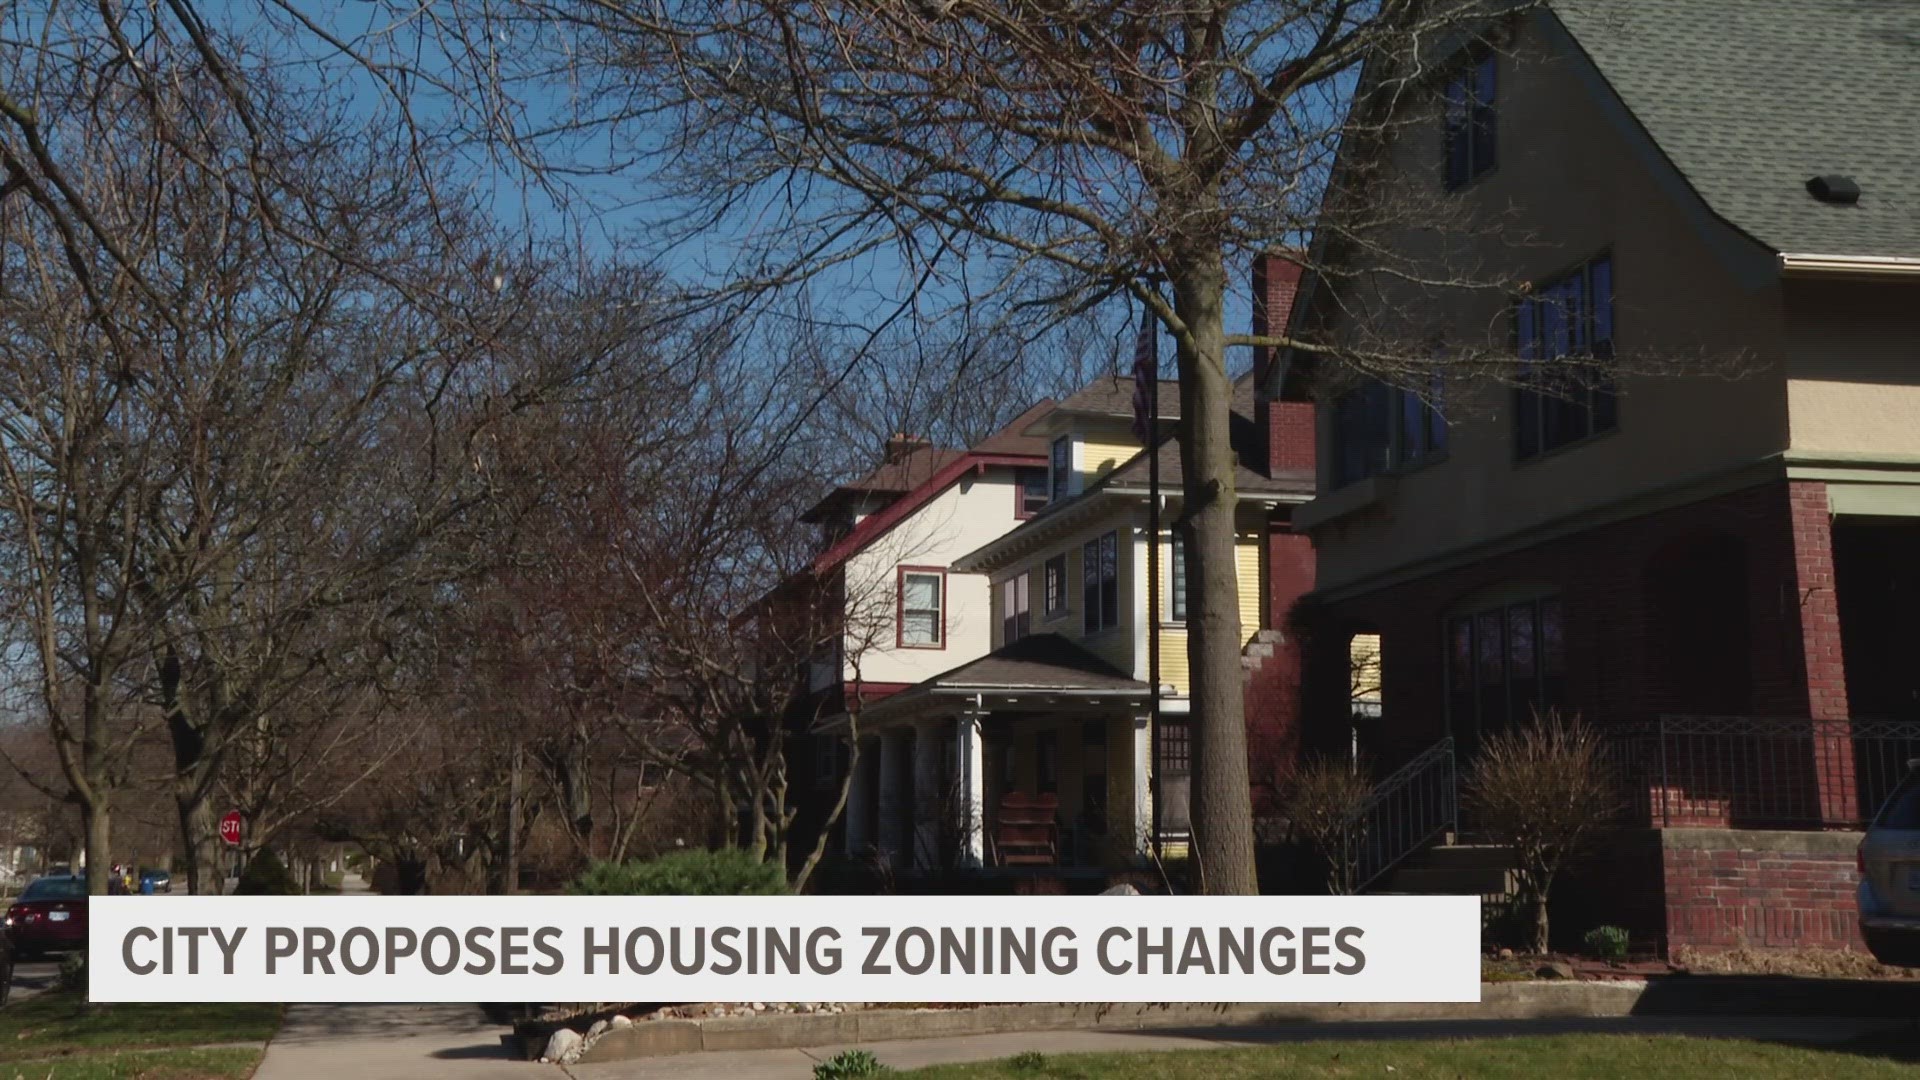 While the city needs more housing, some residents do not like the proposed solution.